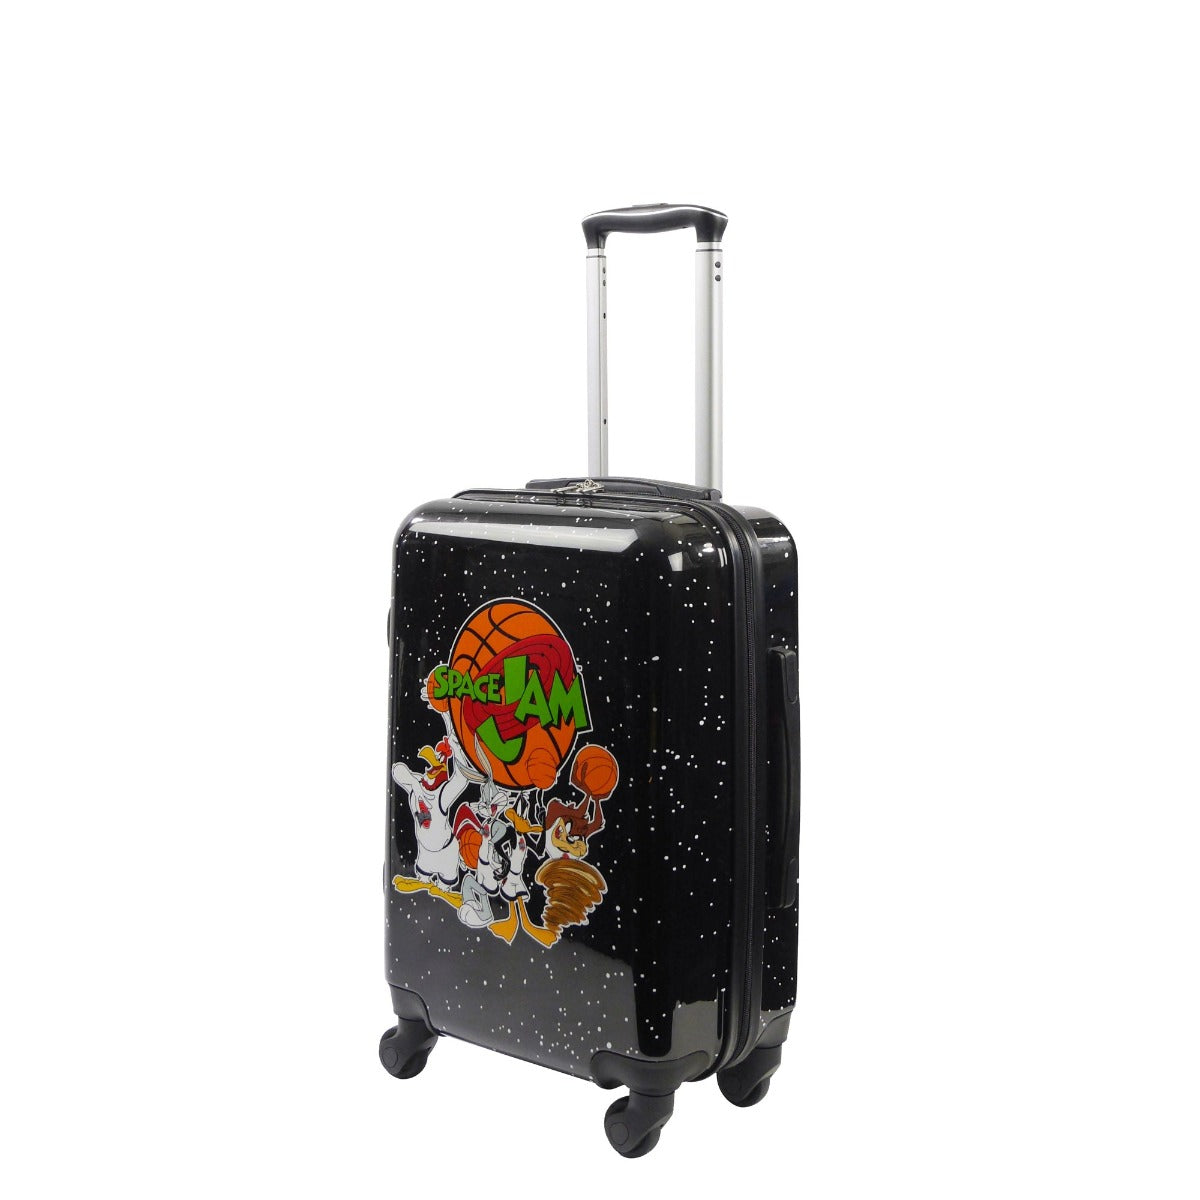 Ful Space Jam 21" hardside spinner carry on suitcase - best luggage for traveling